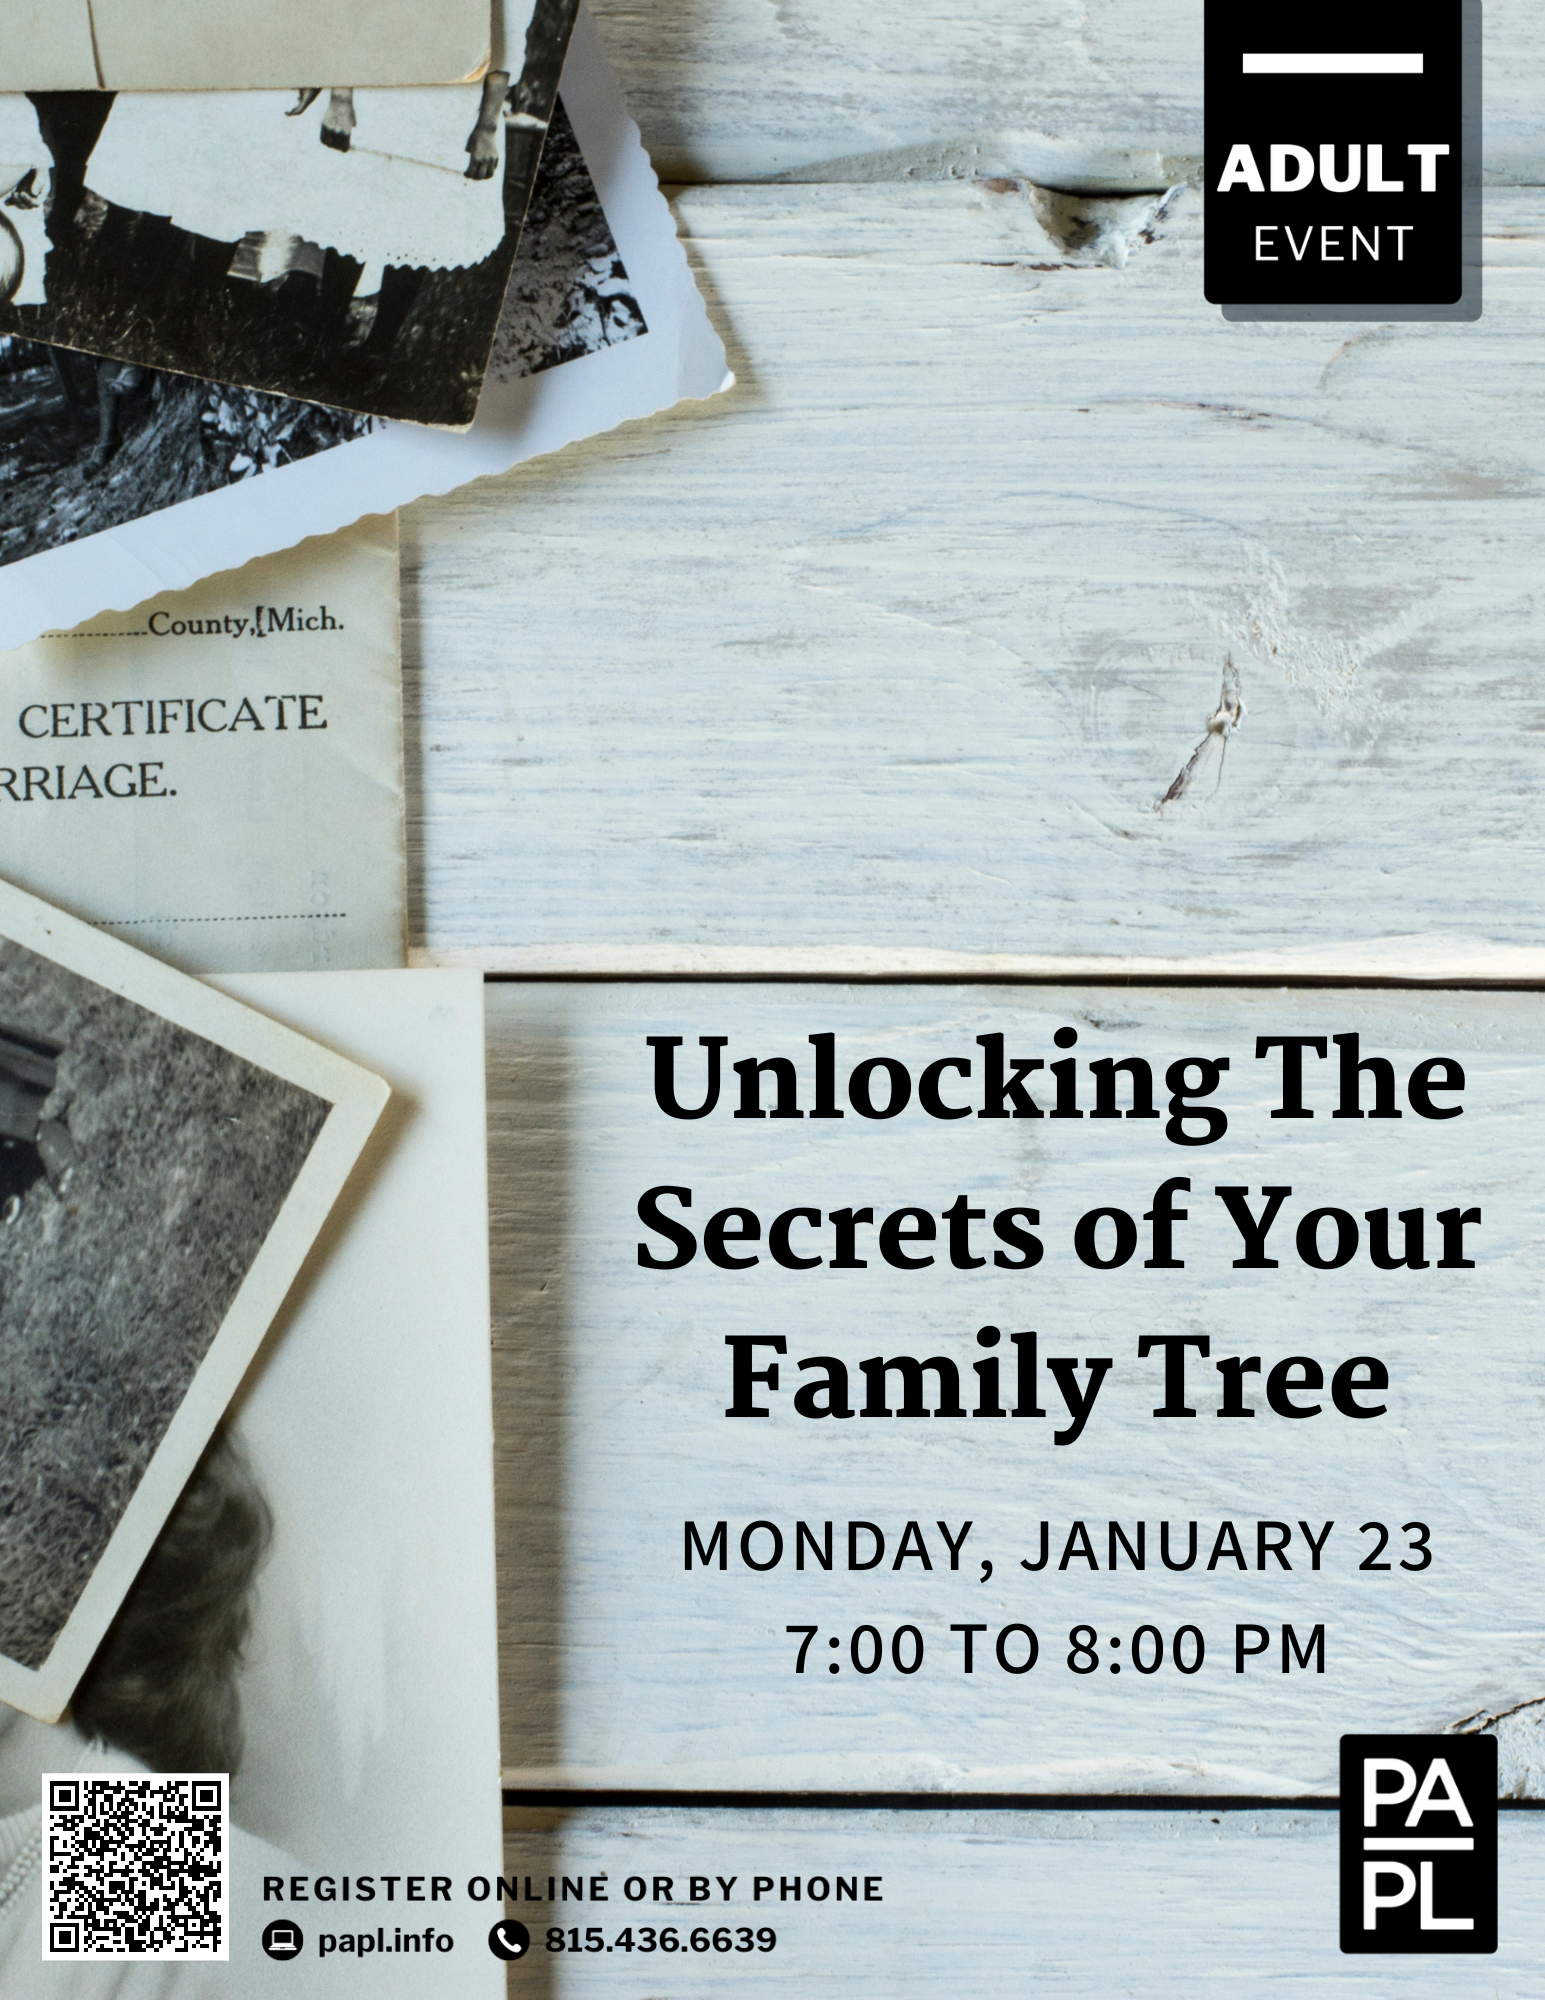 Unlocking The Secrets of Your Family Tree